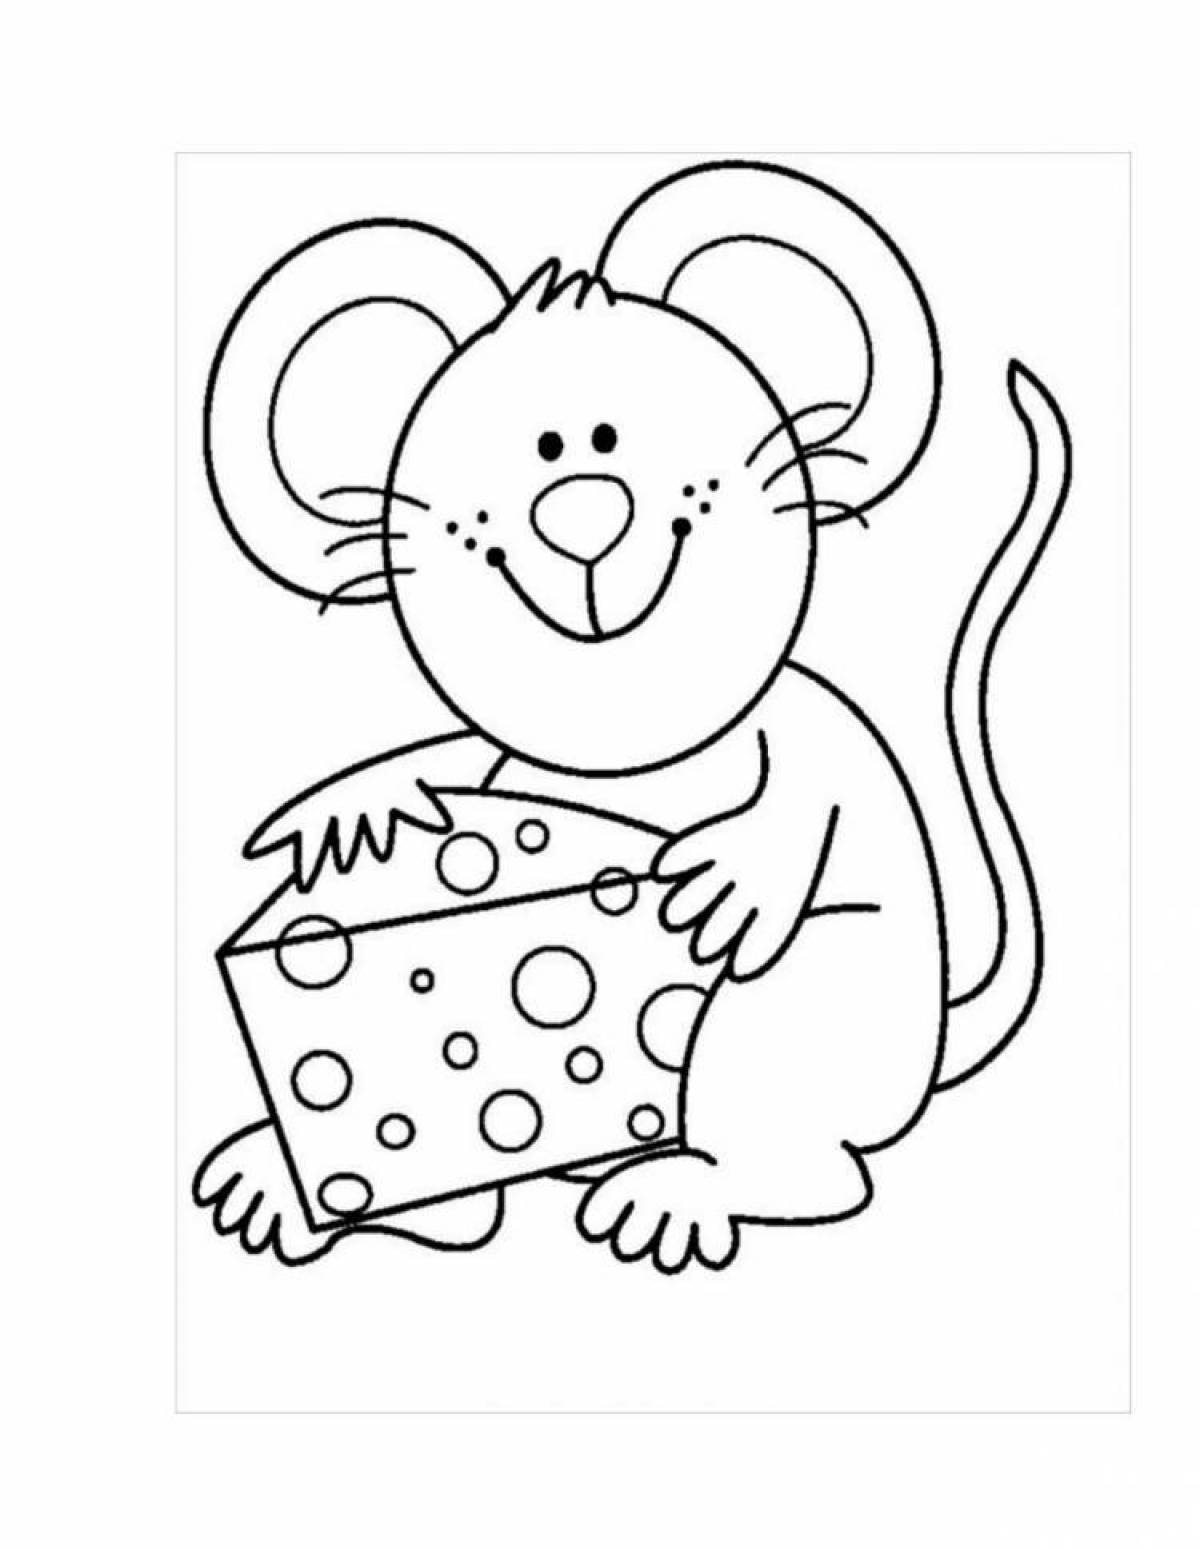 Coloring cute mouse for kids